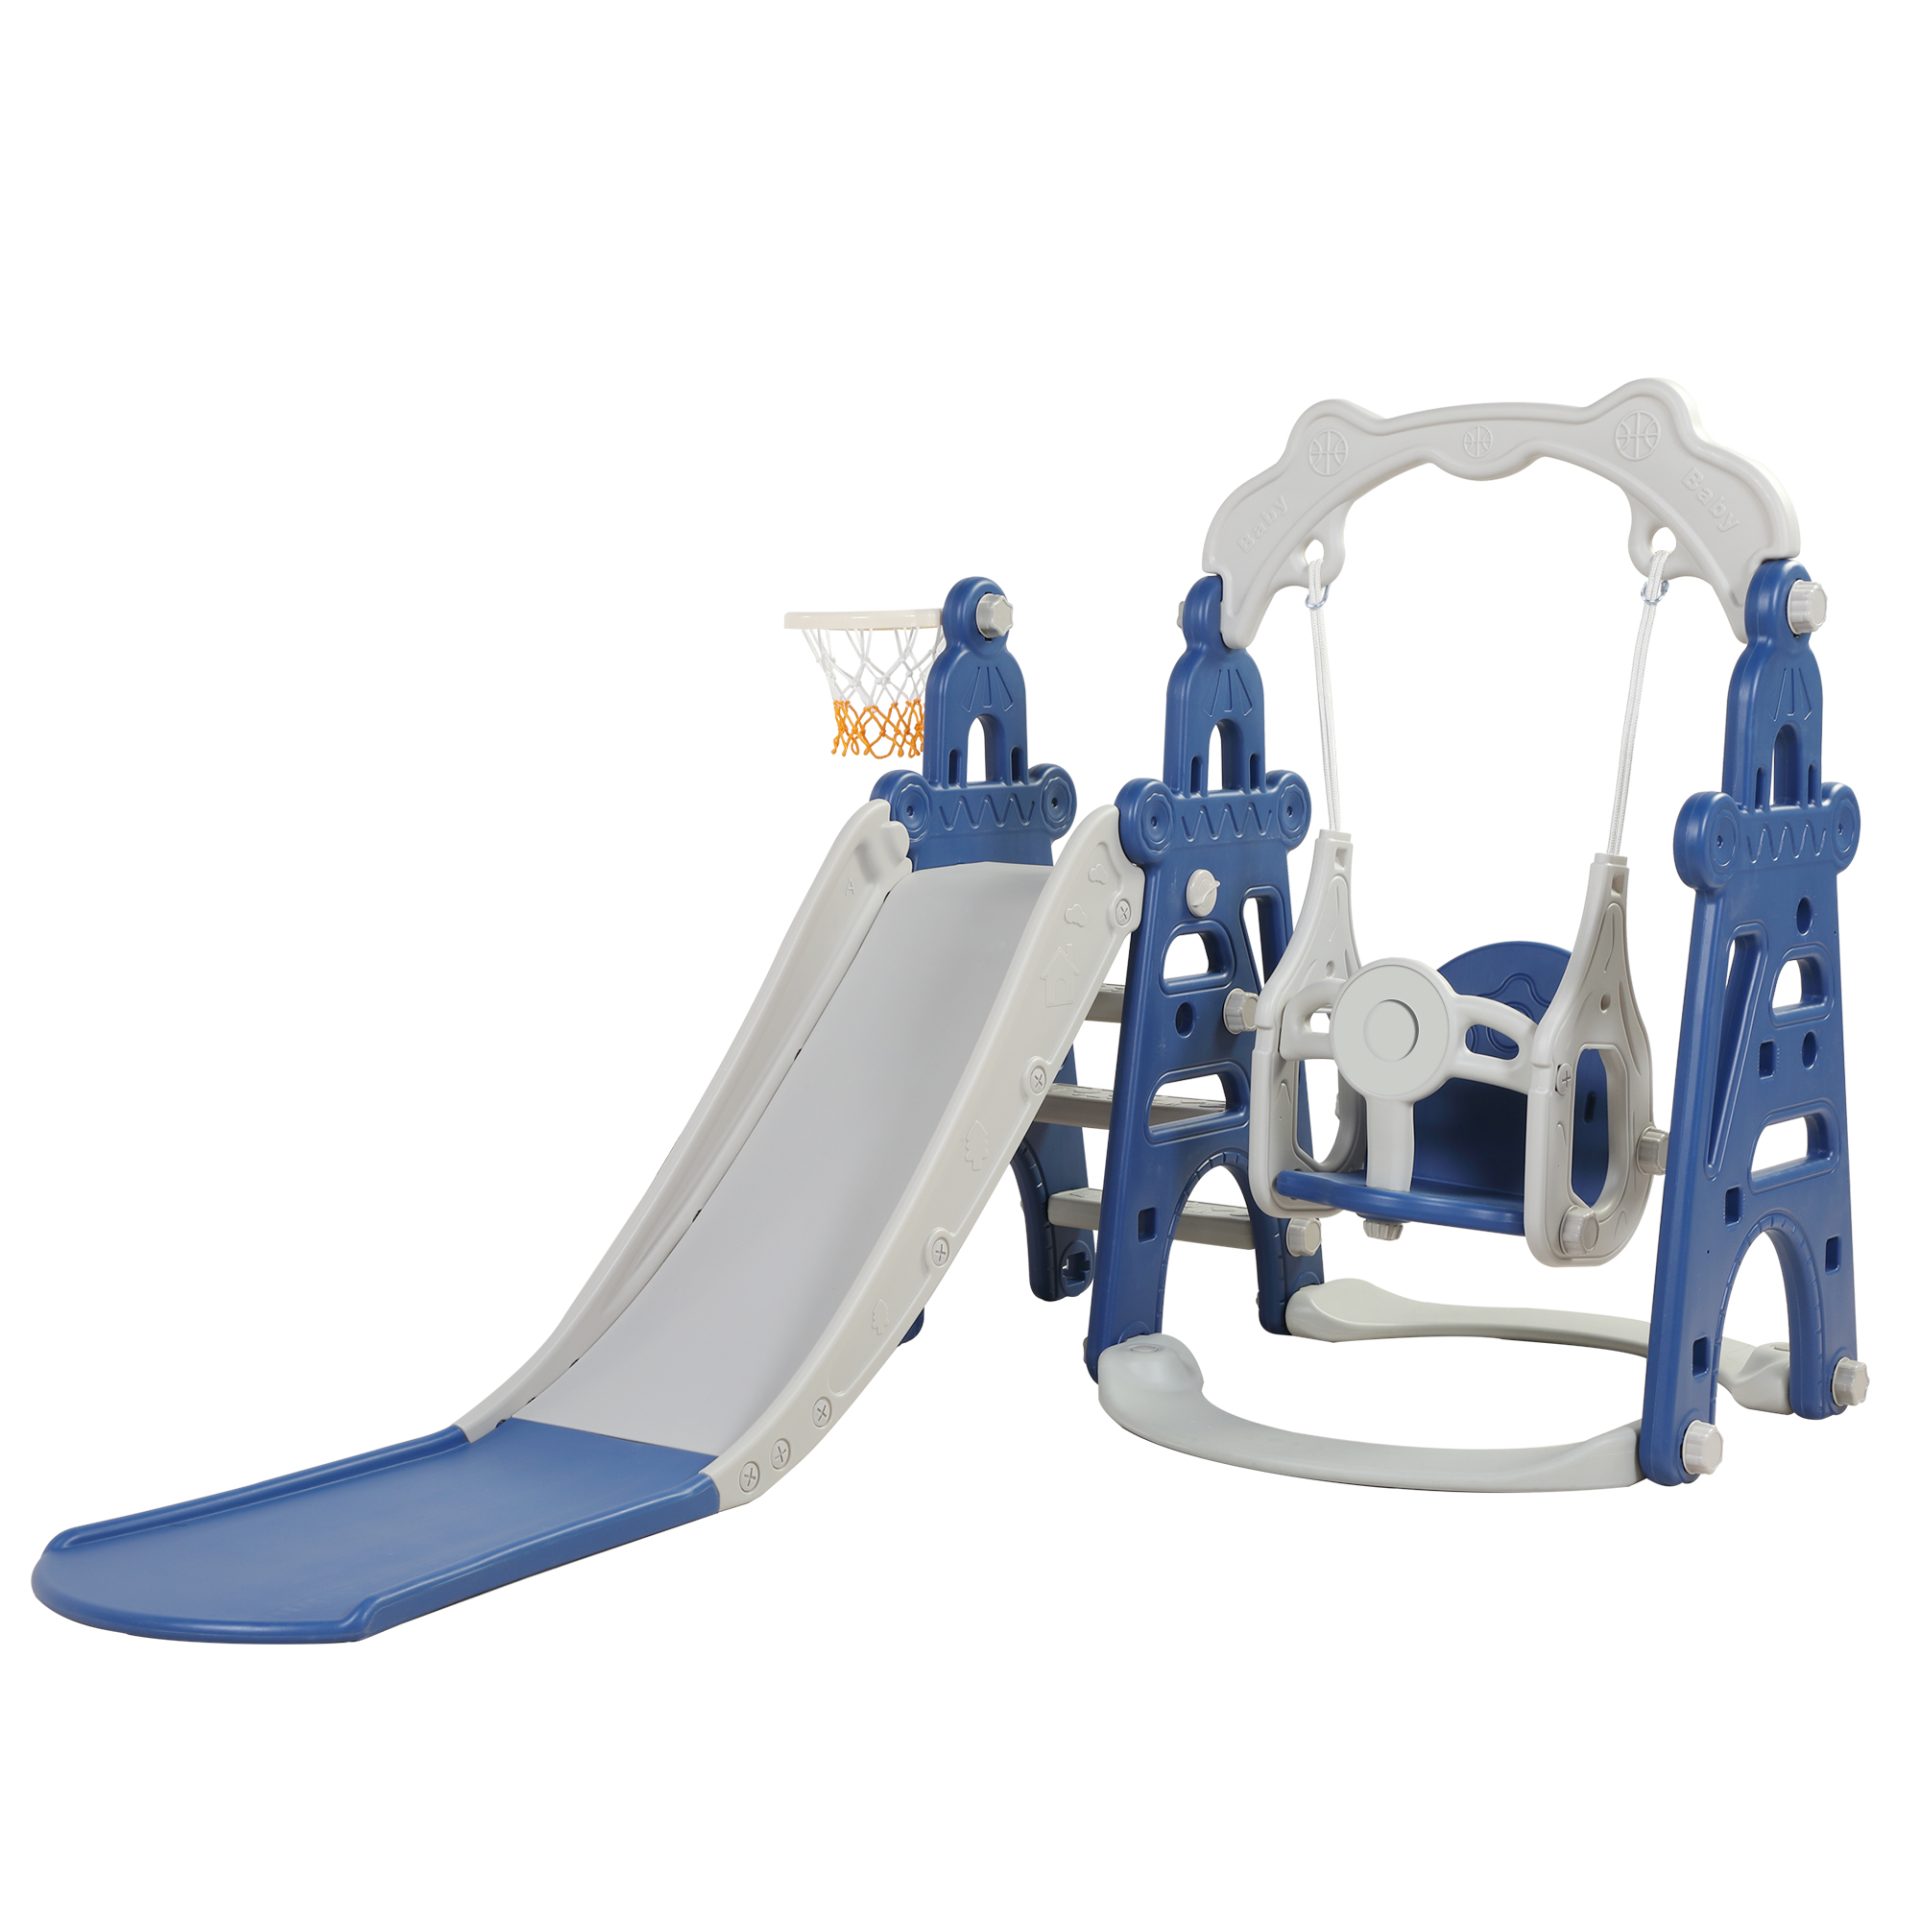 Nyeekoy 4-In-1 Toddler Extra-Long Slide and Swing Set Play Ground for Kids, Climber Slide Toy w/ Basketball Hoop, Indoor and Outdoor, Blue+Gray TH17H07566